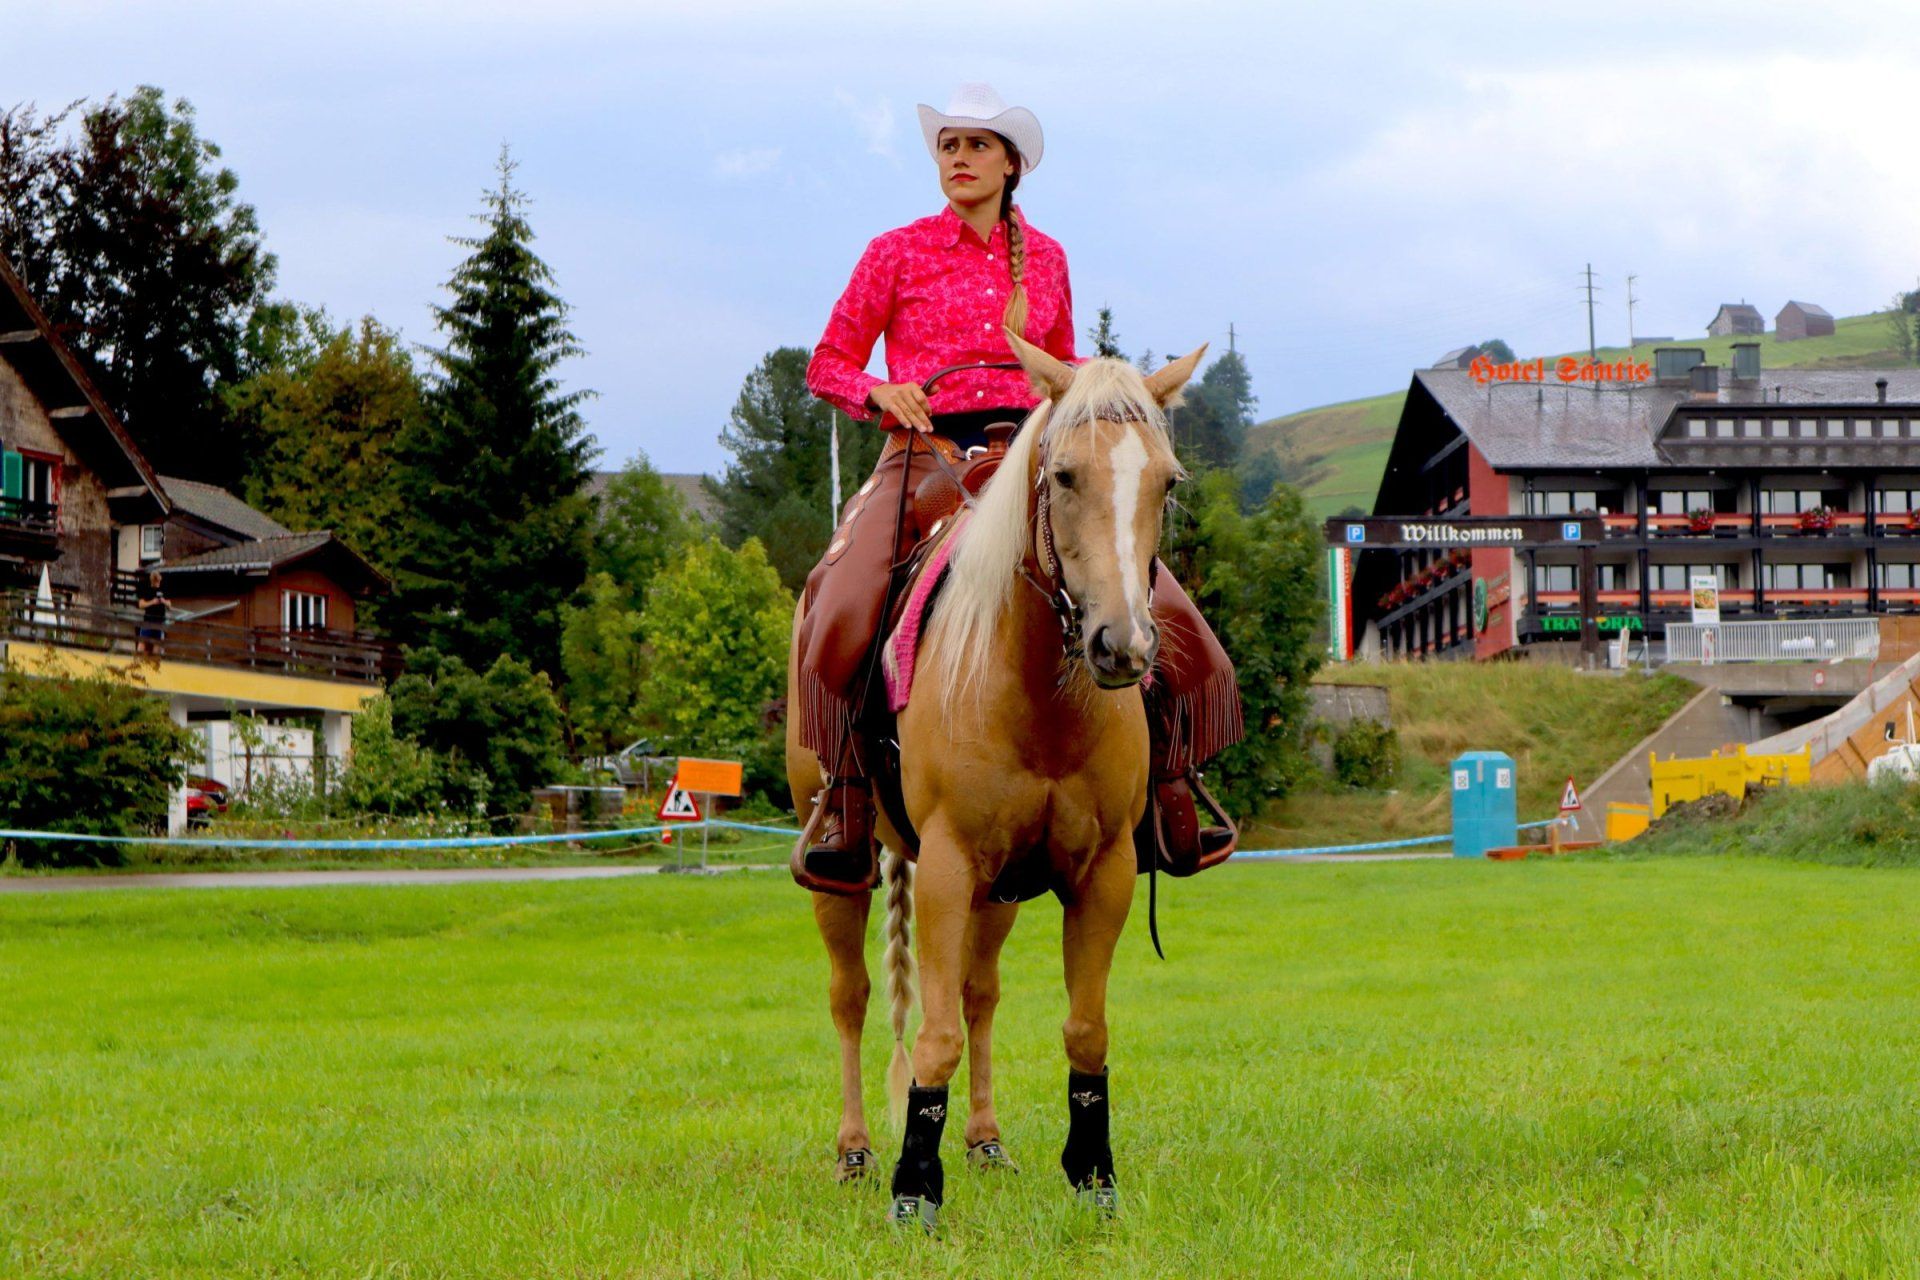 a woman riding a horse in a field with a hotel in the background